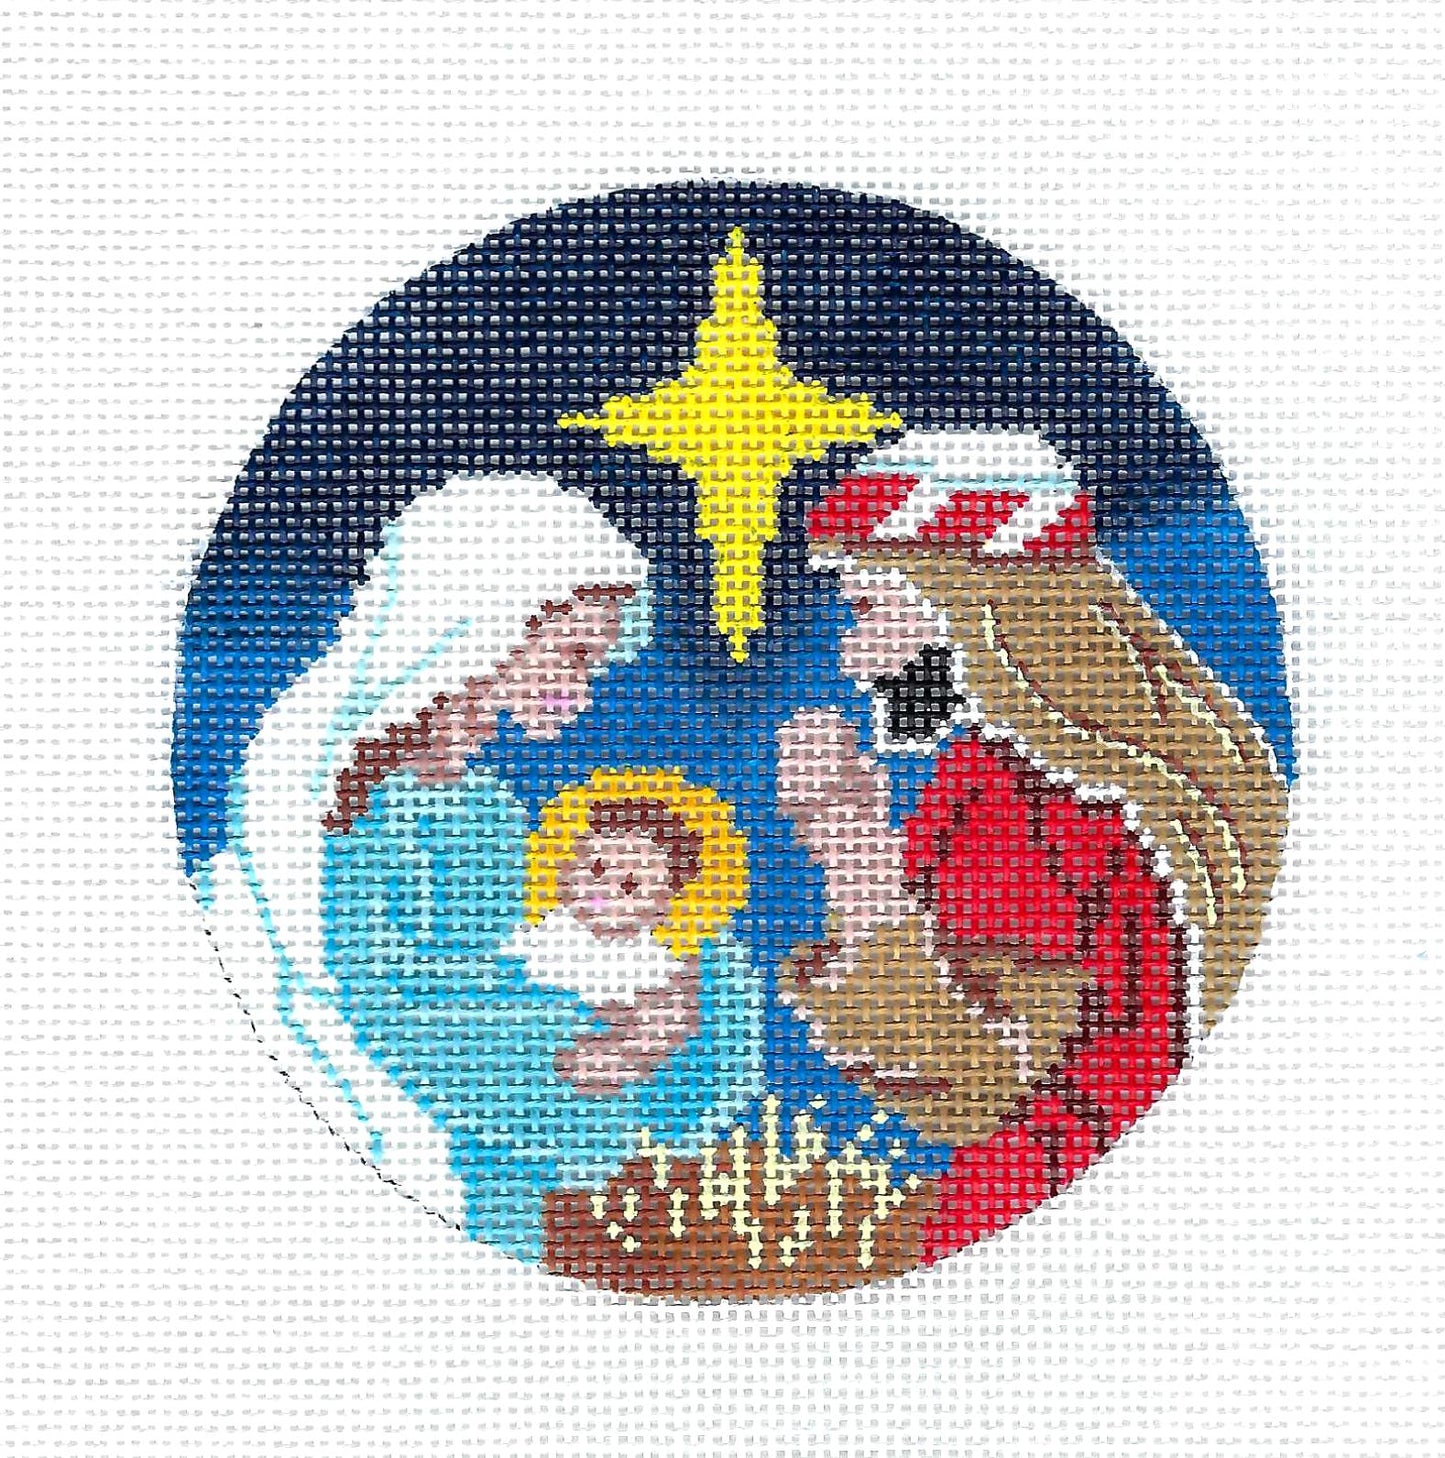 Holy Family ~ Mary, Joseph, and Baby Jesus ~ handpainted Needlepoint Canvas Ornament by Alice Peterson